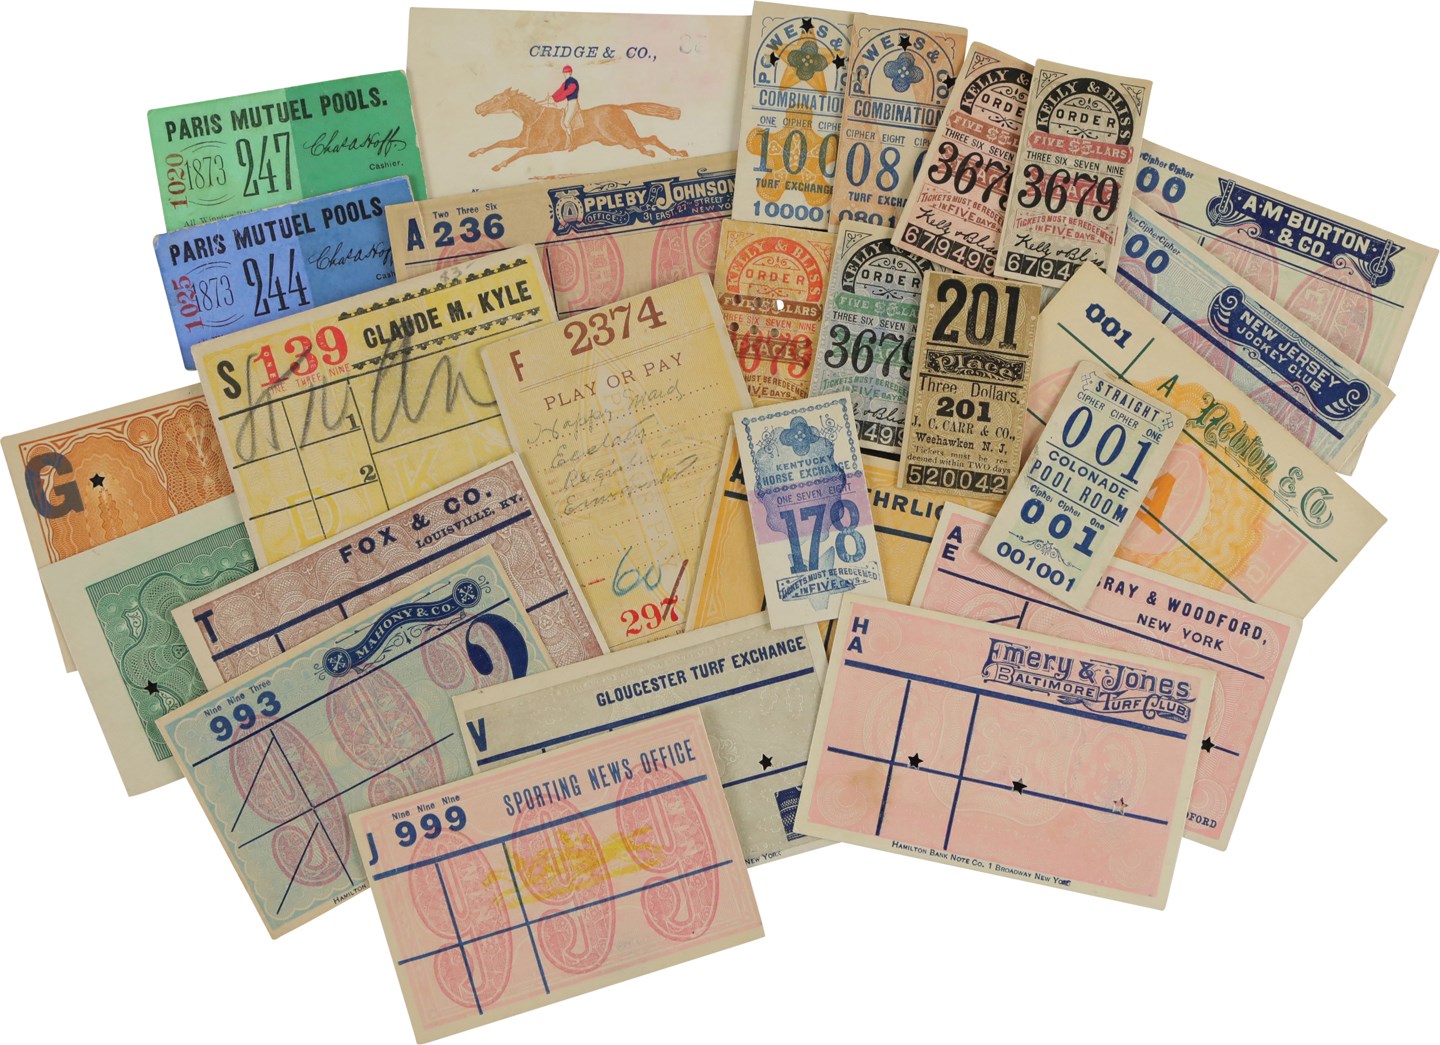 Horse Racing - Original Paris Mutuel Pool & Poolroom Wagering Tickets from Over a Century Ago (27)